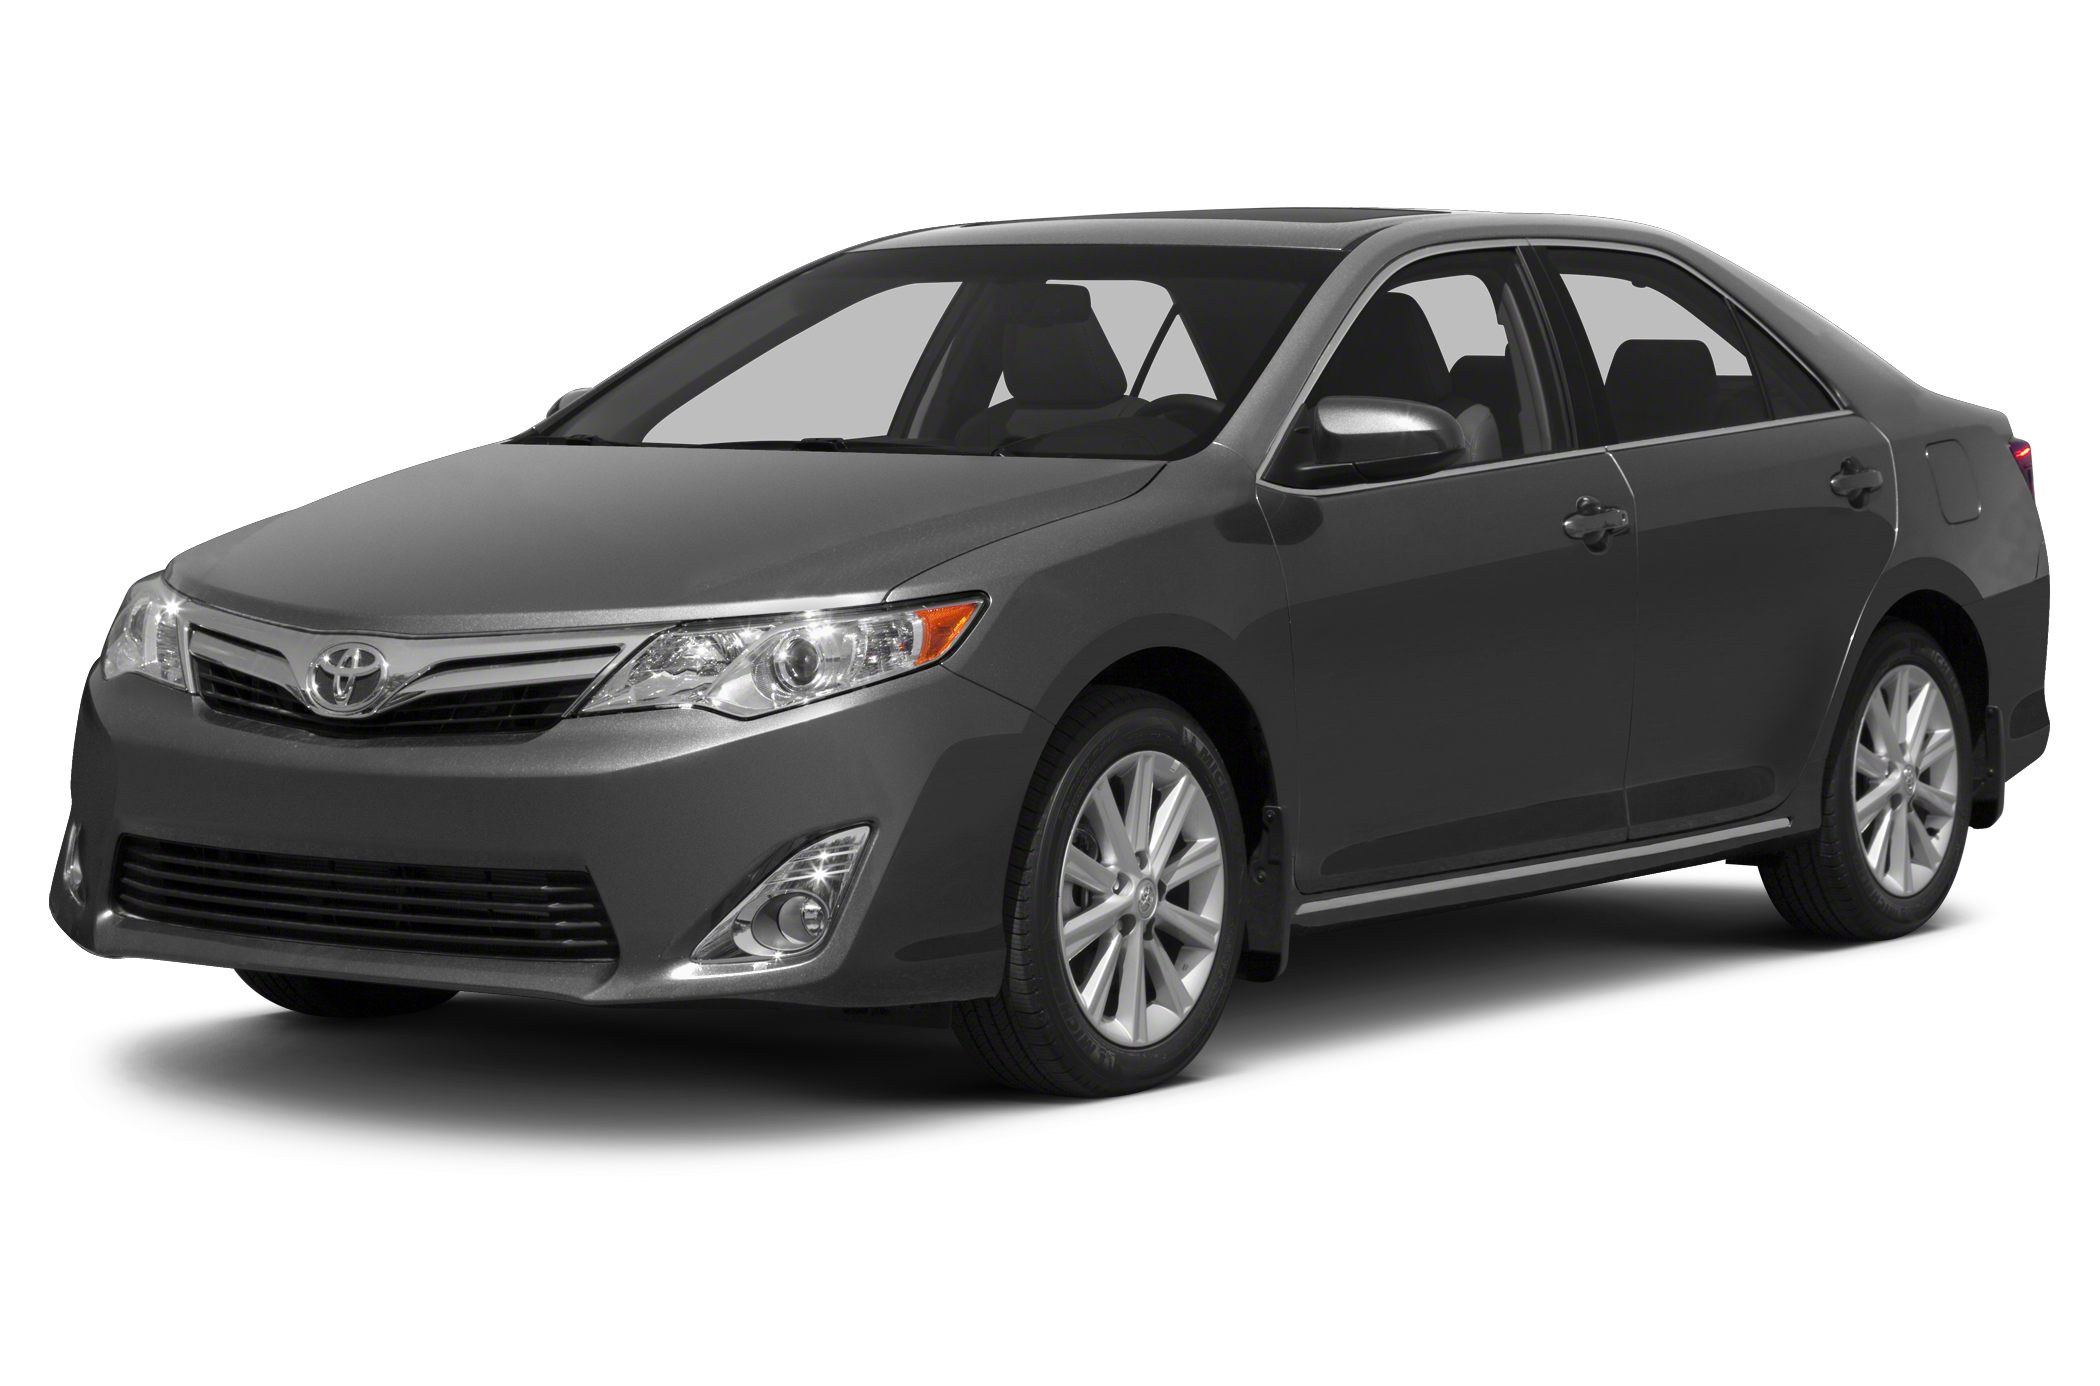 2013 Toyota Camry oem parts and accessories on sale